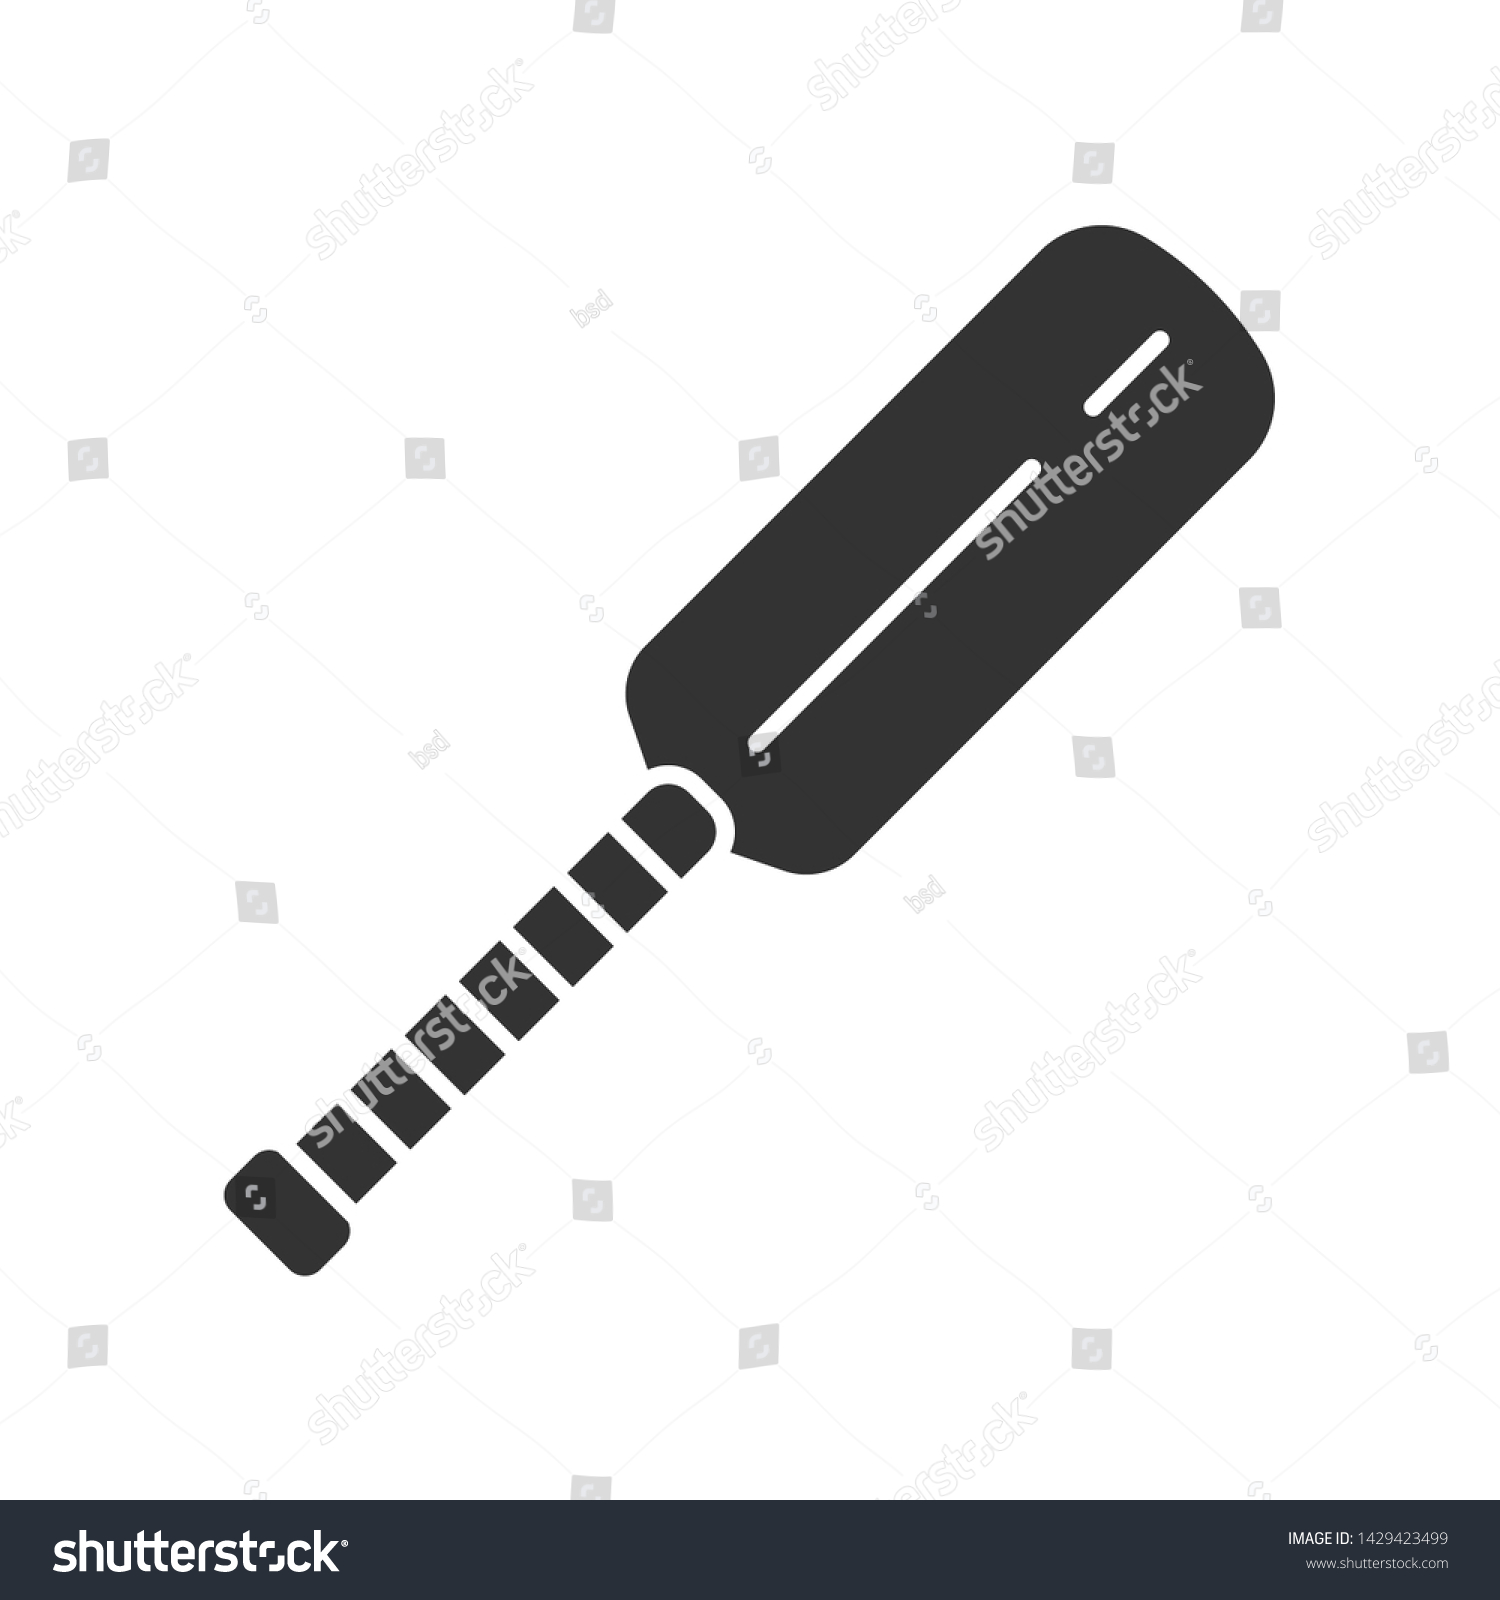 SVG of Cricket bat glyph icon. Equipment for batsmen. Wooden flat block with long handle. Professional sports accessory. Outdoor game gear. Silhouette symbol. Negative space. Vector isolated illustration svg